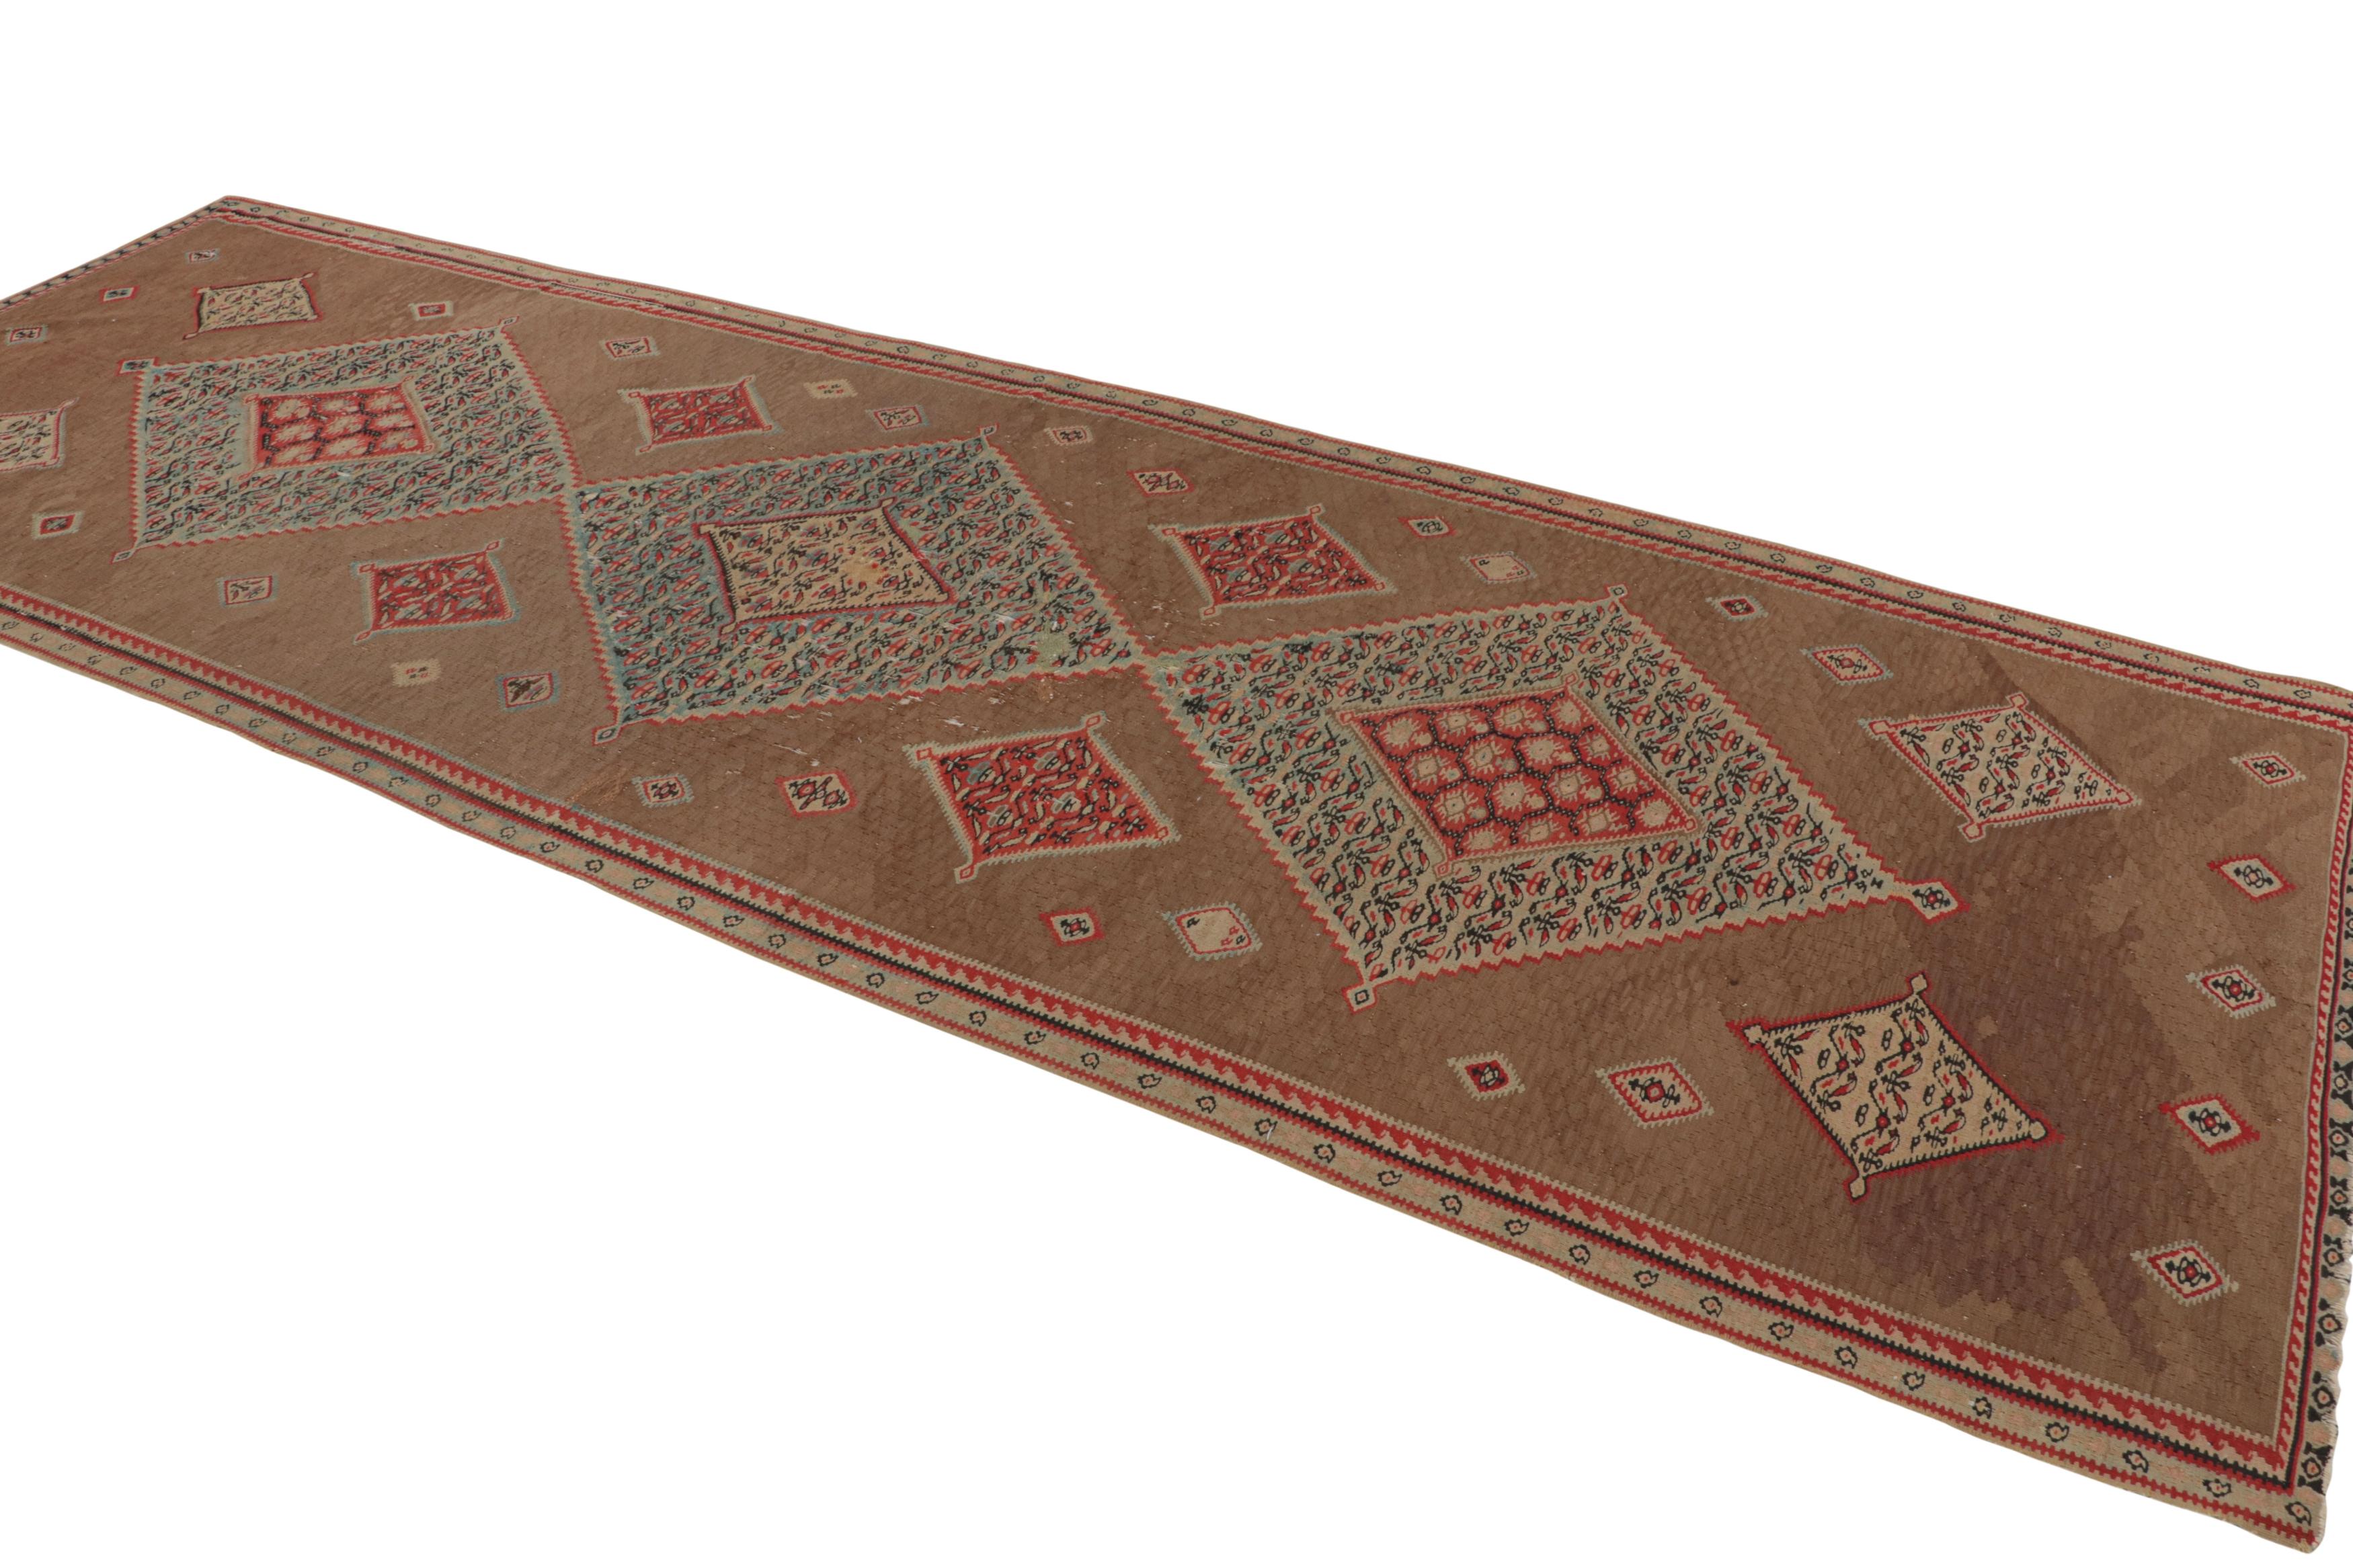 Antique Geometric Beige and Red Wool Persian Kilim-Senneh Runner by Rug & Kilim In Good Condition For Sale In Long Island City, NY